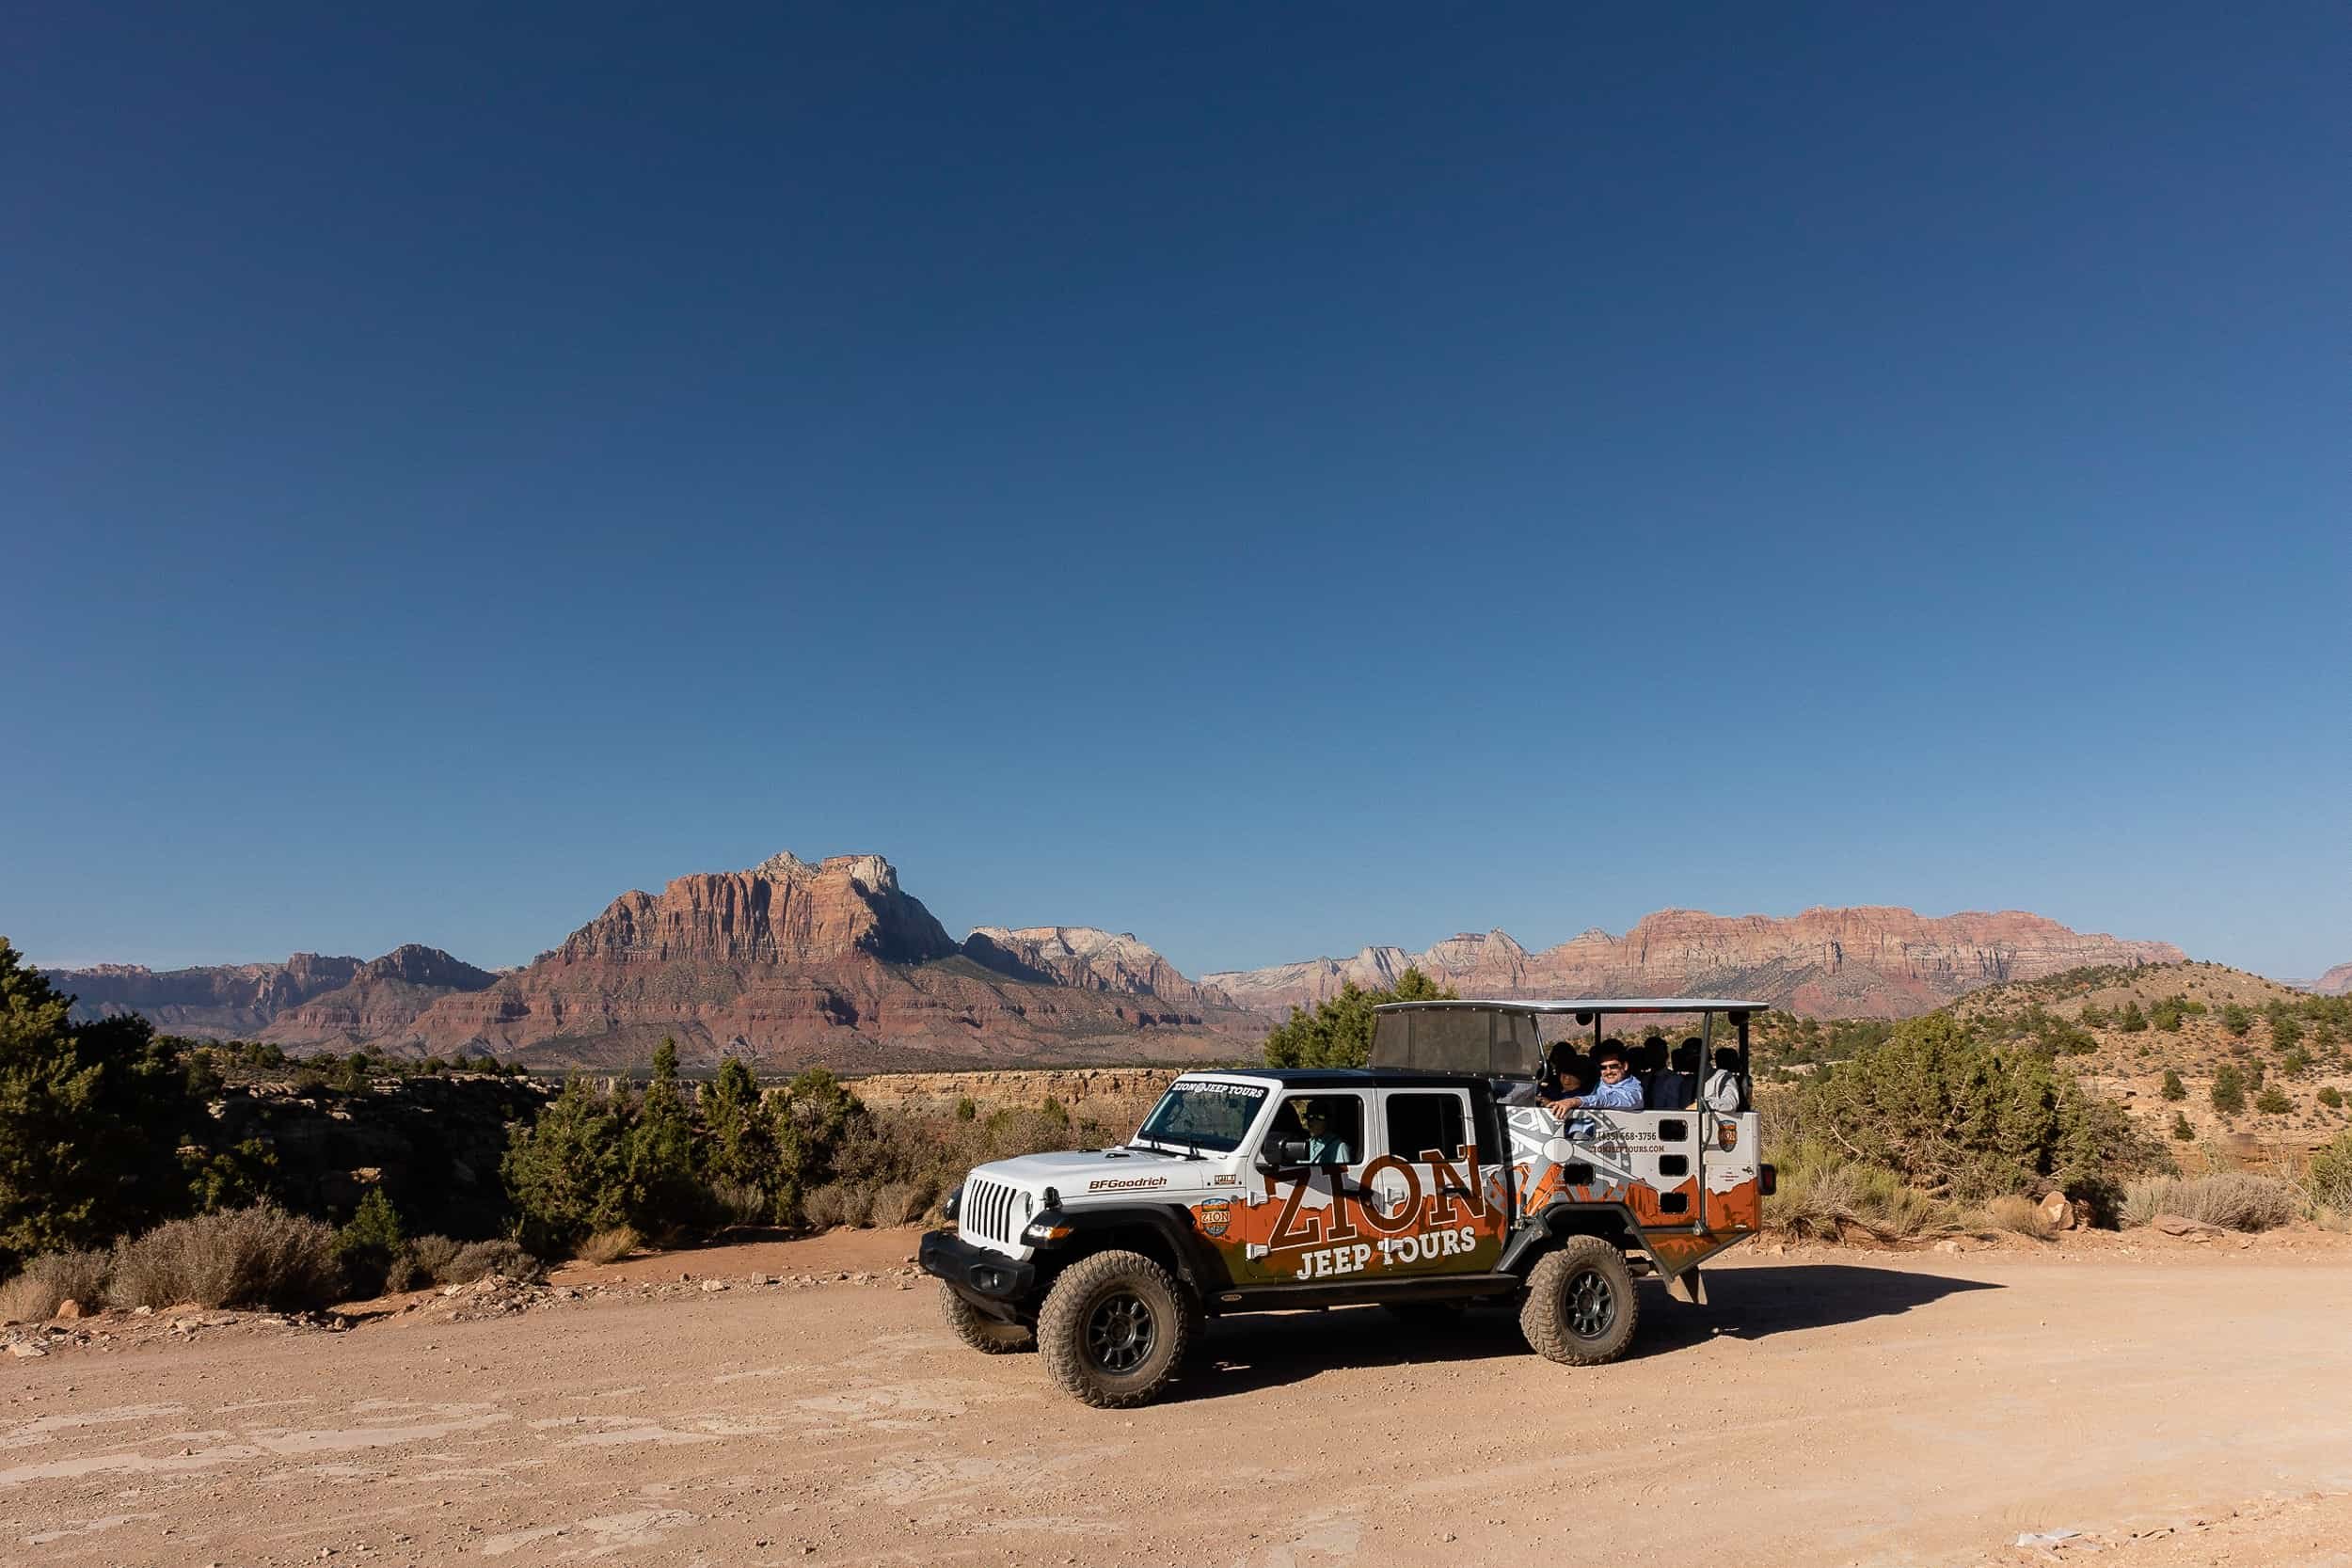 Wedding group ride in a Jeep in Zion National Park during a sunset tour